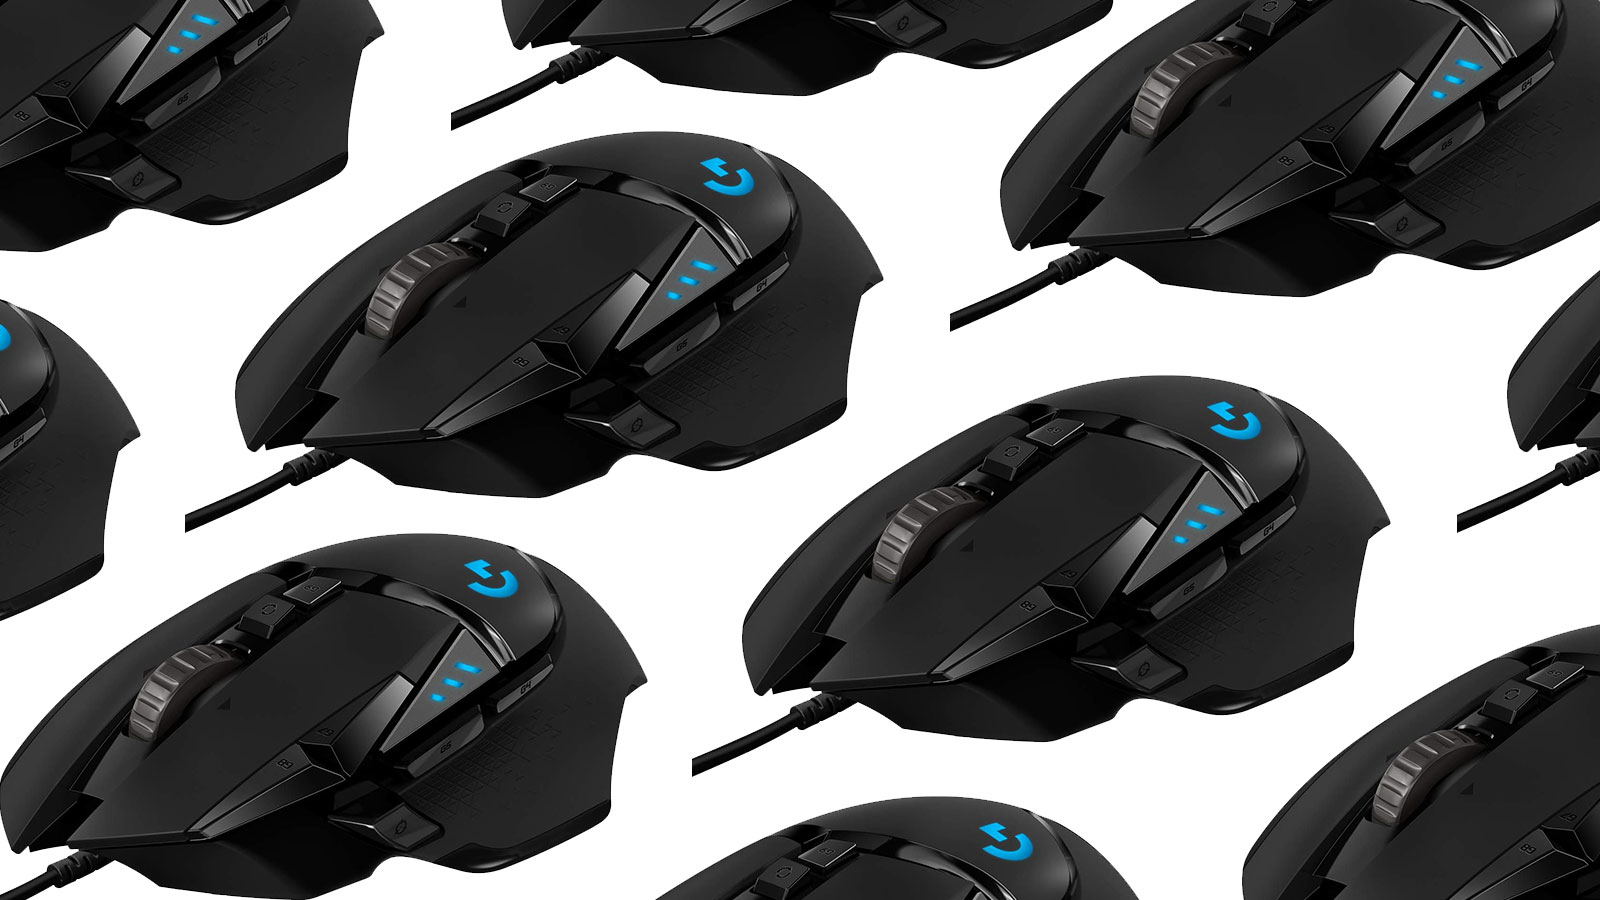 One of Logitech’s best gaming mice is just $35 at Amazon